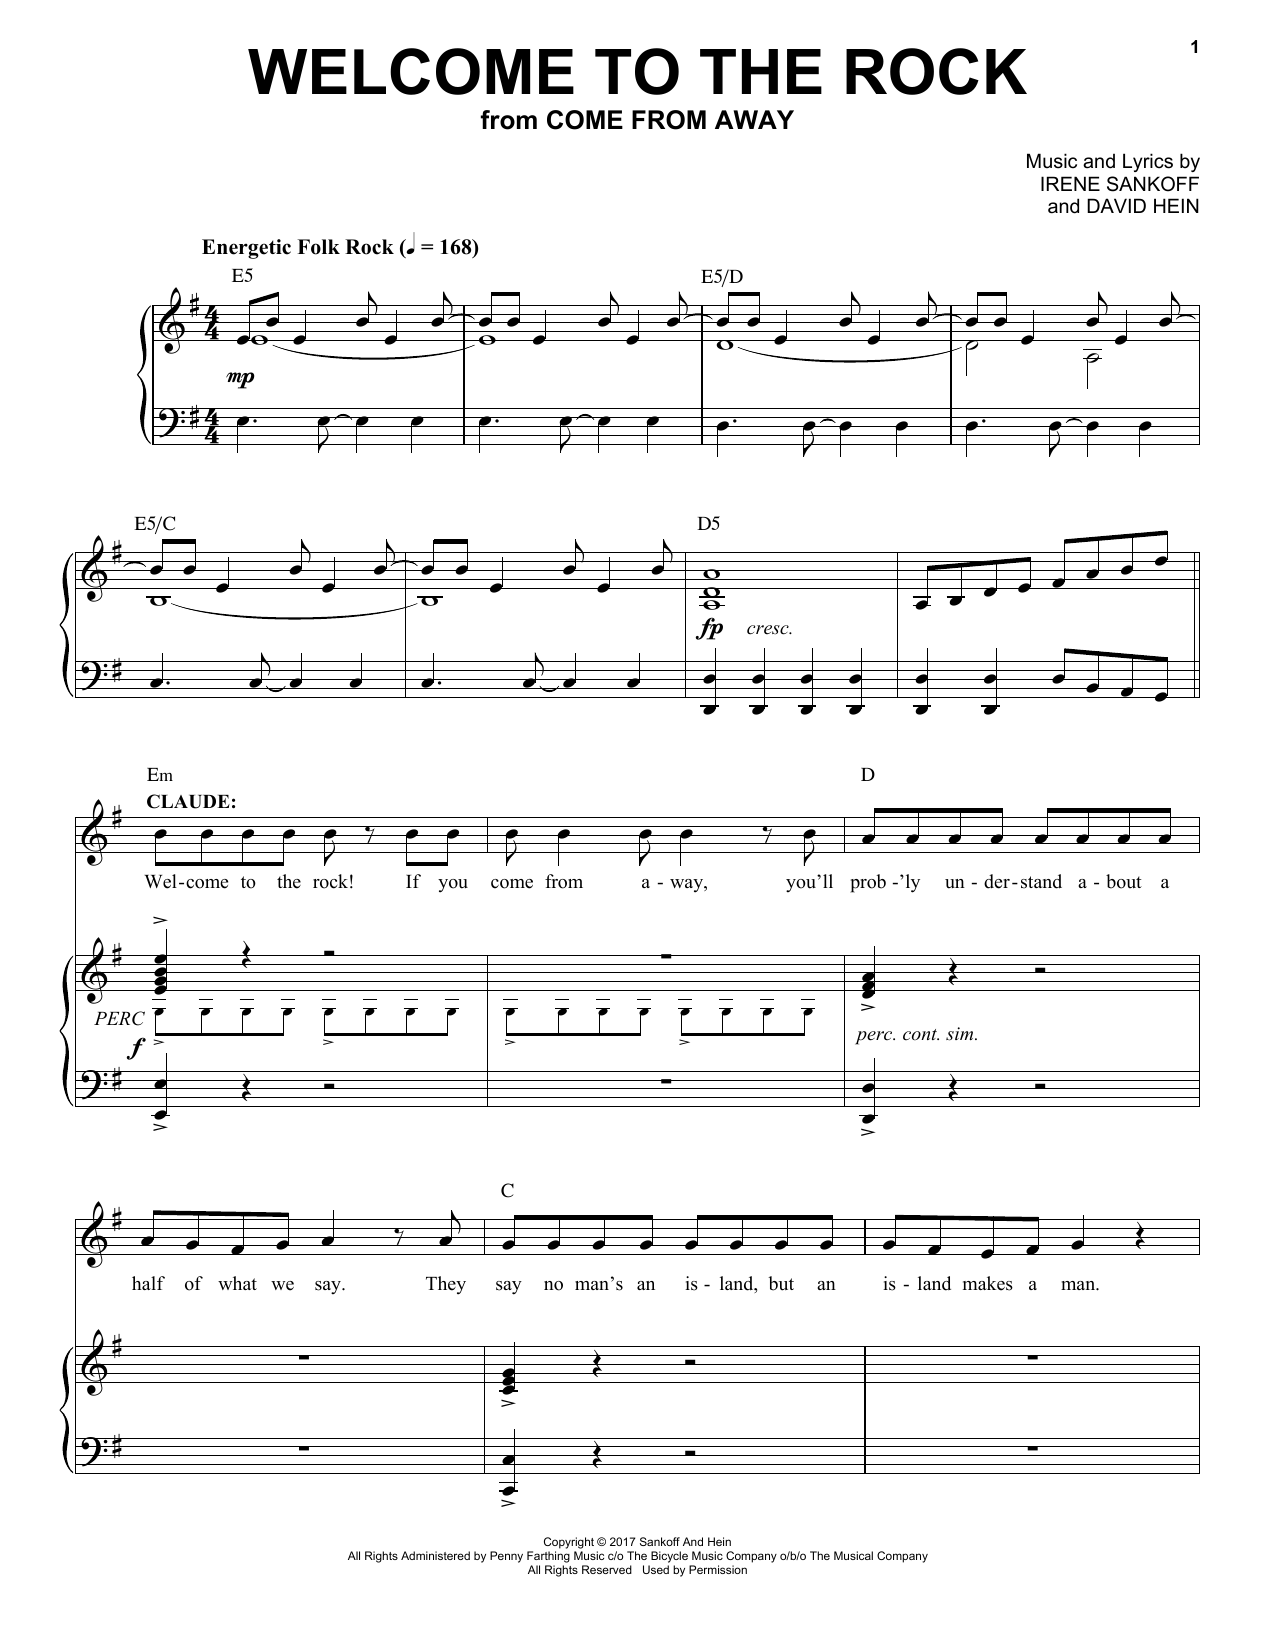 Download Irene Sankoff & David Hein Welcome To The Rock (from Come from Awa Sheet Music